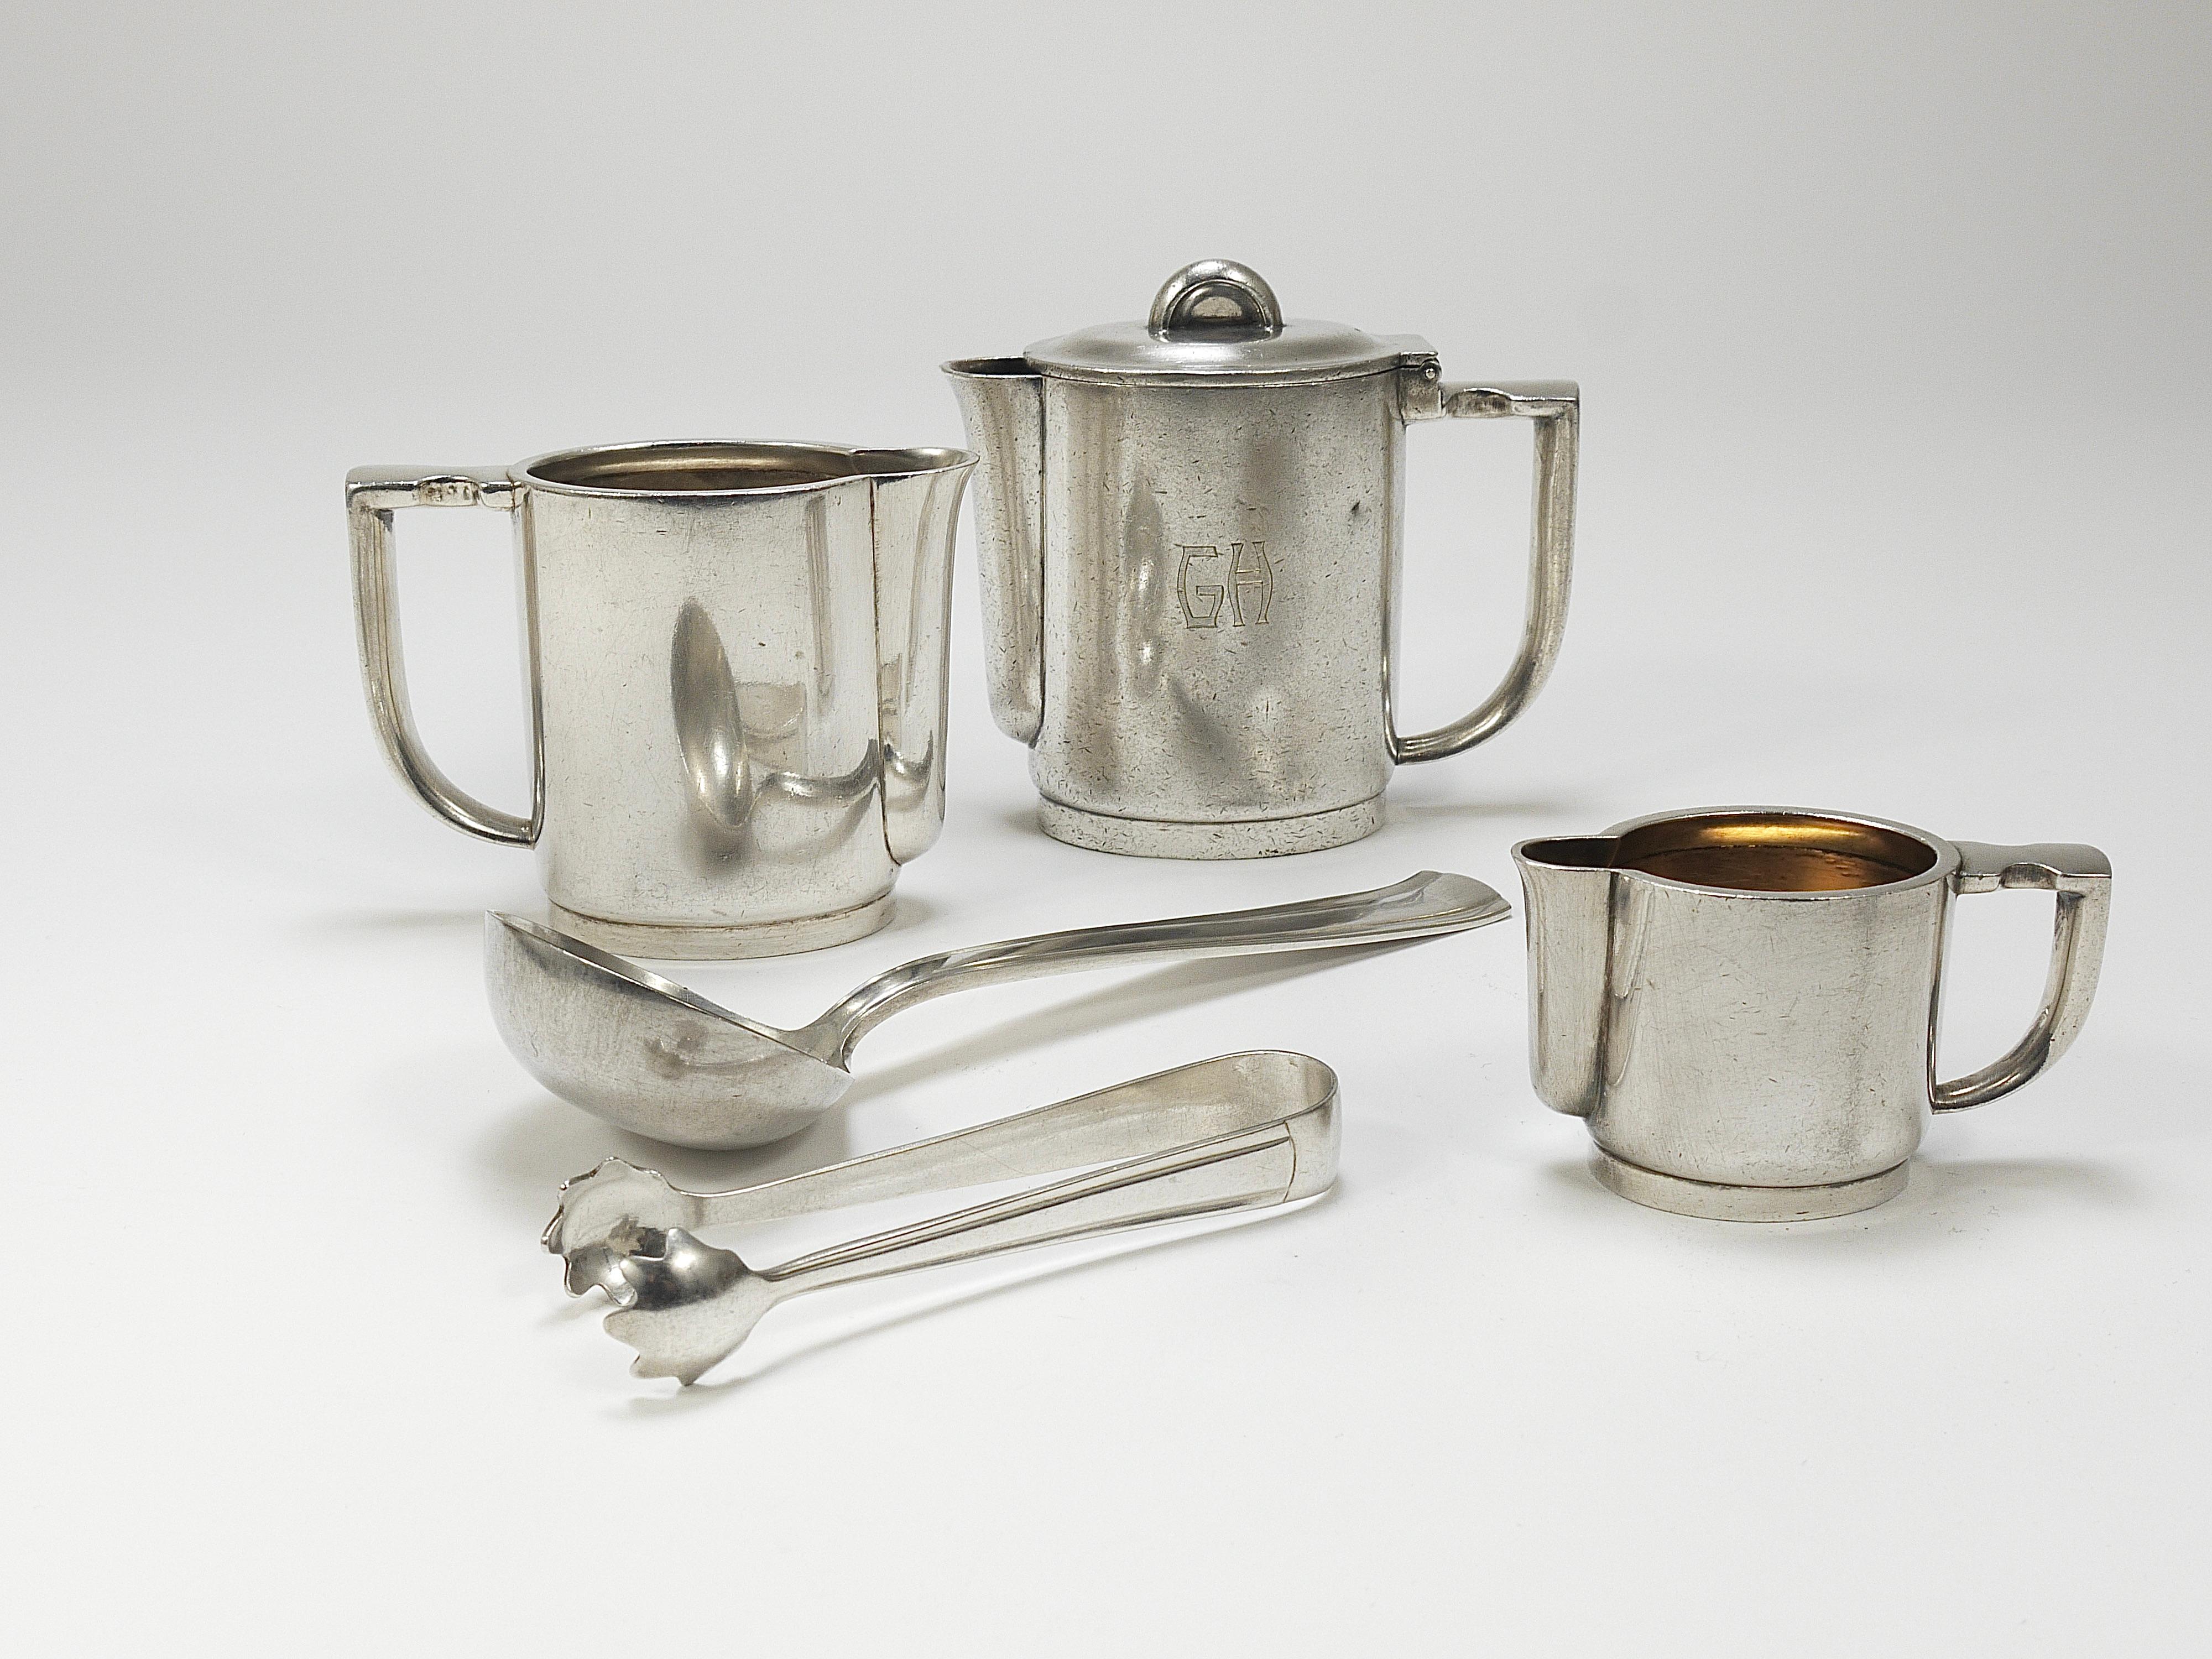 An Elegant Art Deco tableware collection , designed by Gio Ponti for Arthur Krupp and crafted in the 1930s by Krupp Berndorf in Austria. The collection includes 
a tea or coffee pot (20 cl)
a milk jug / cream pitcher (15cl) 
small jug (5cl) for